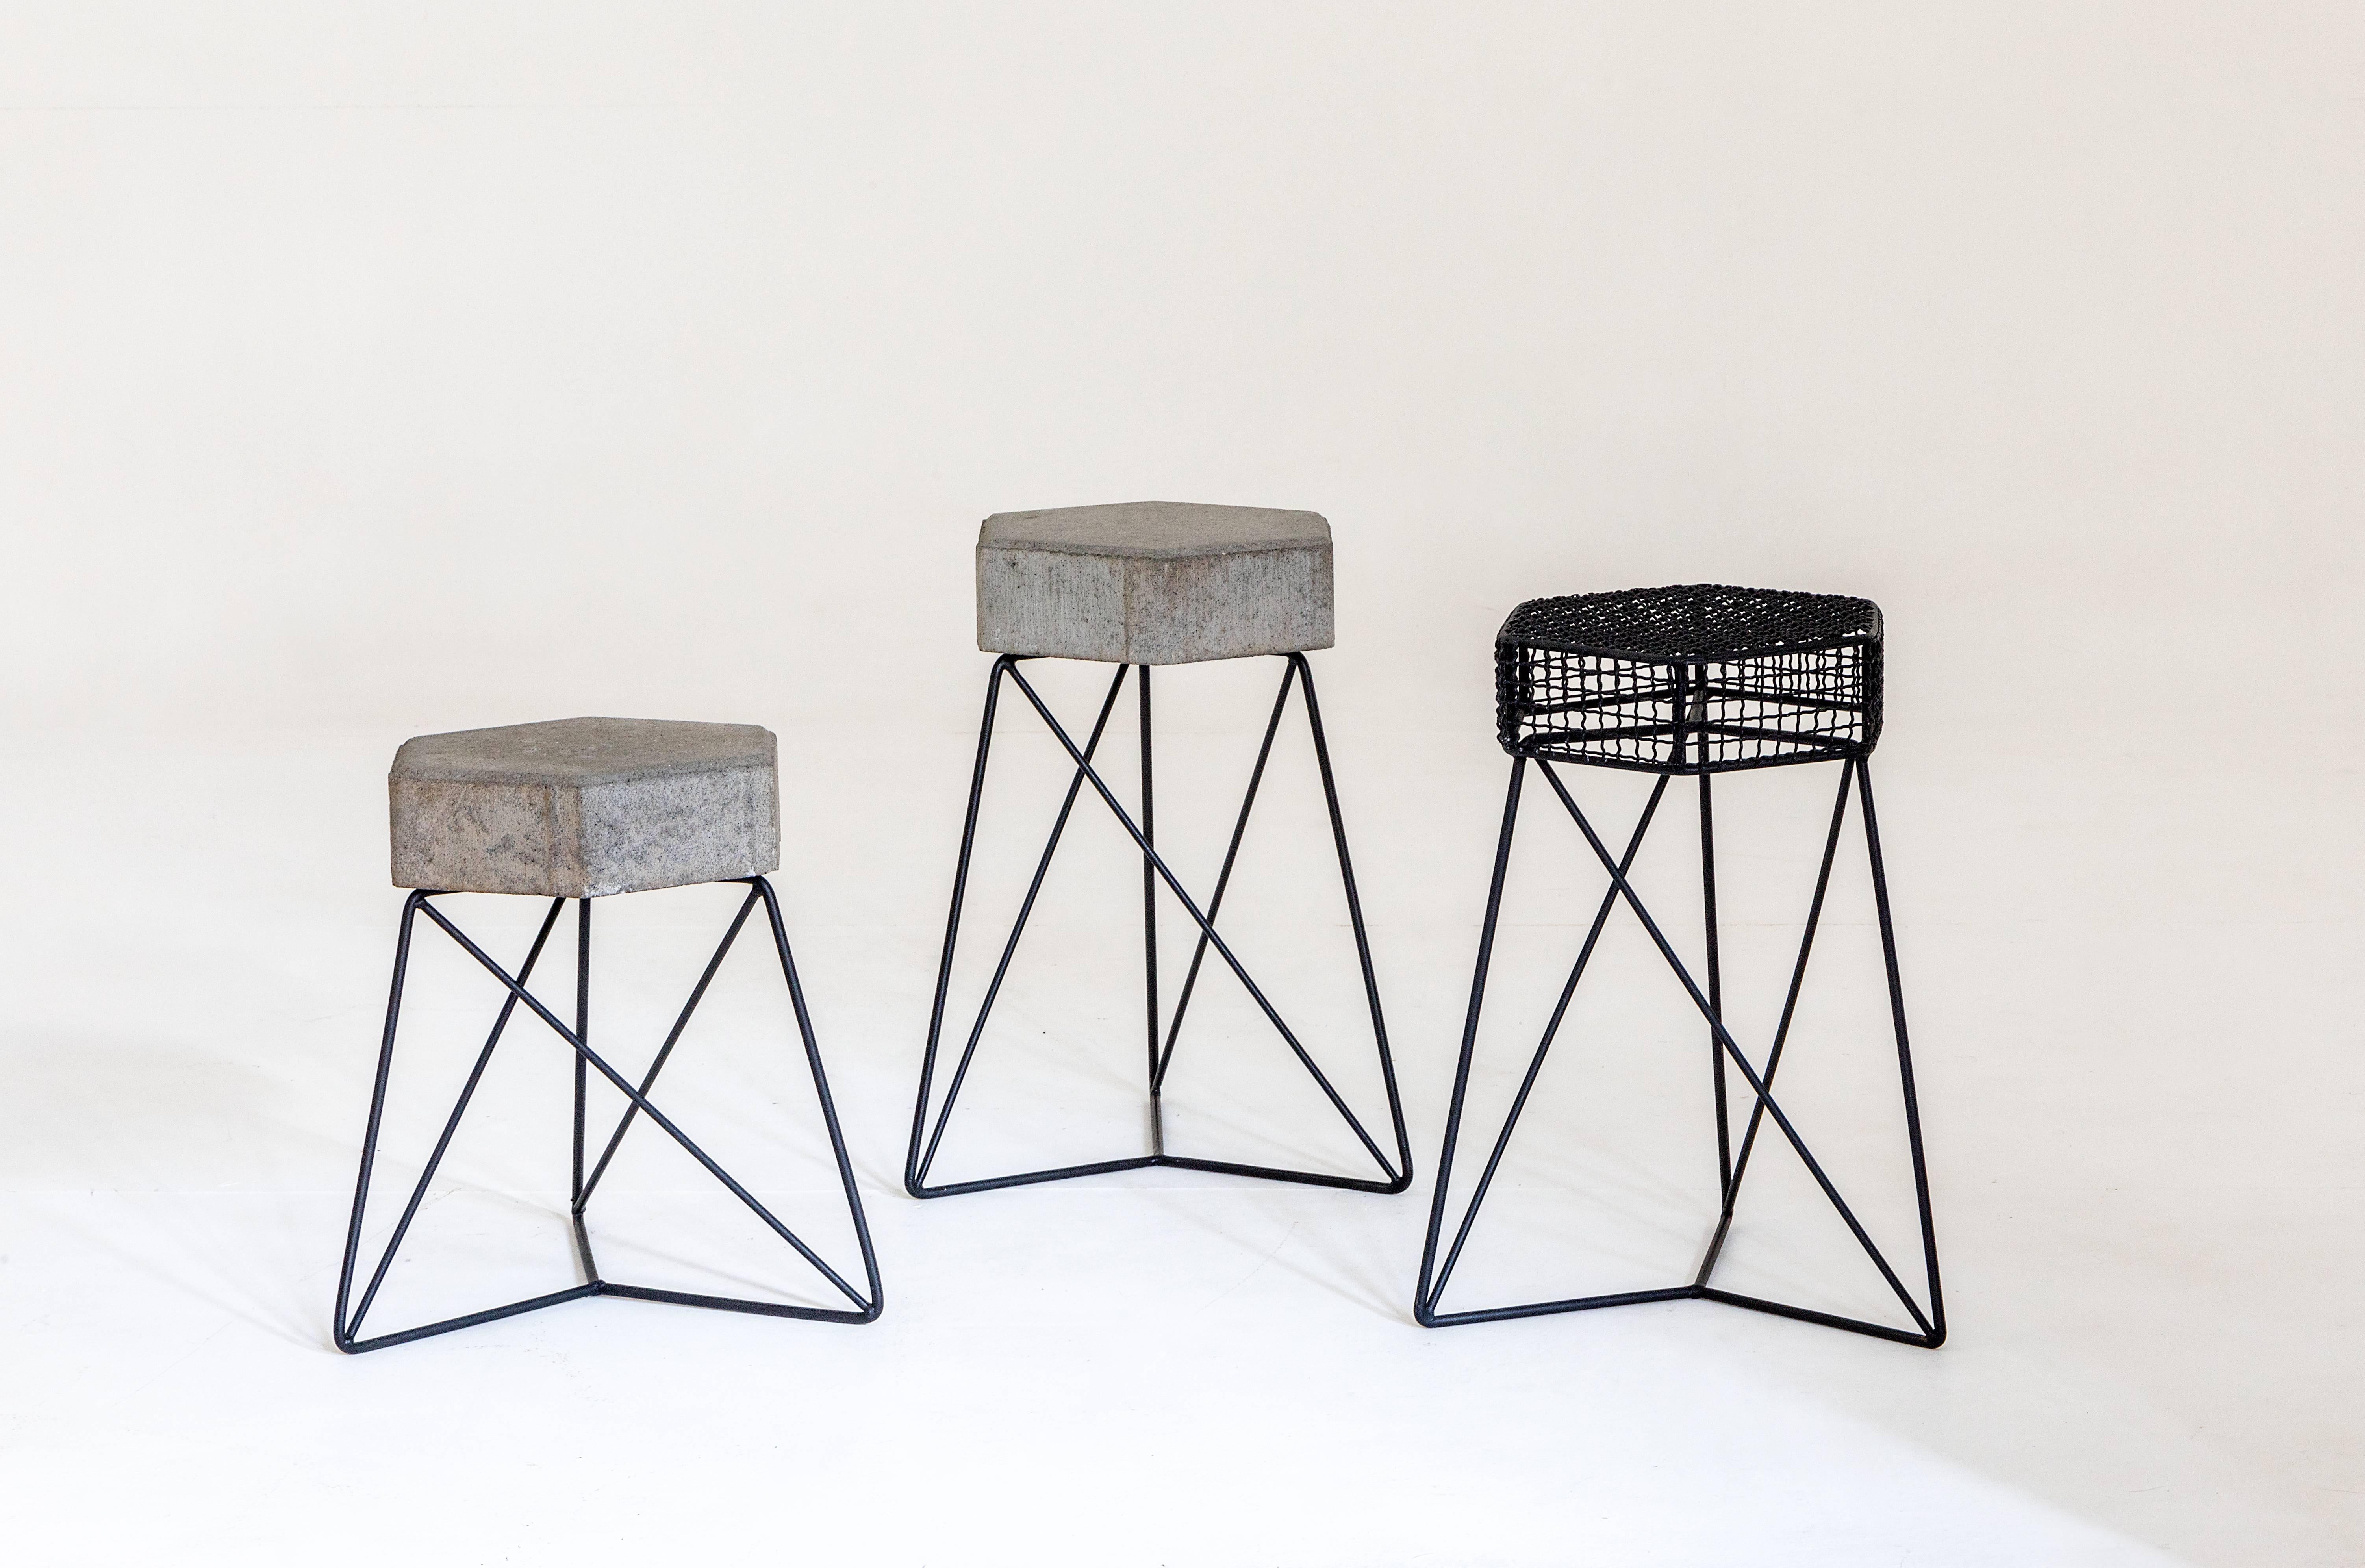 Other Mini Urbe Stool Made of Concrete and Steel Brazilian Contemporary Design For Sale